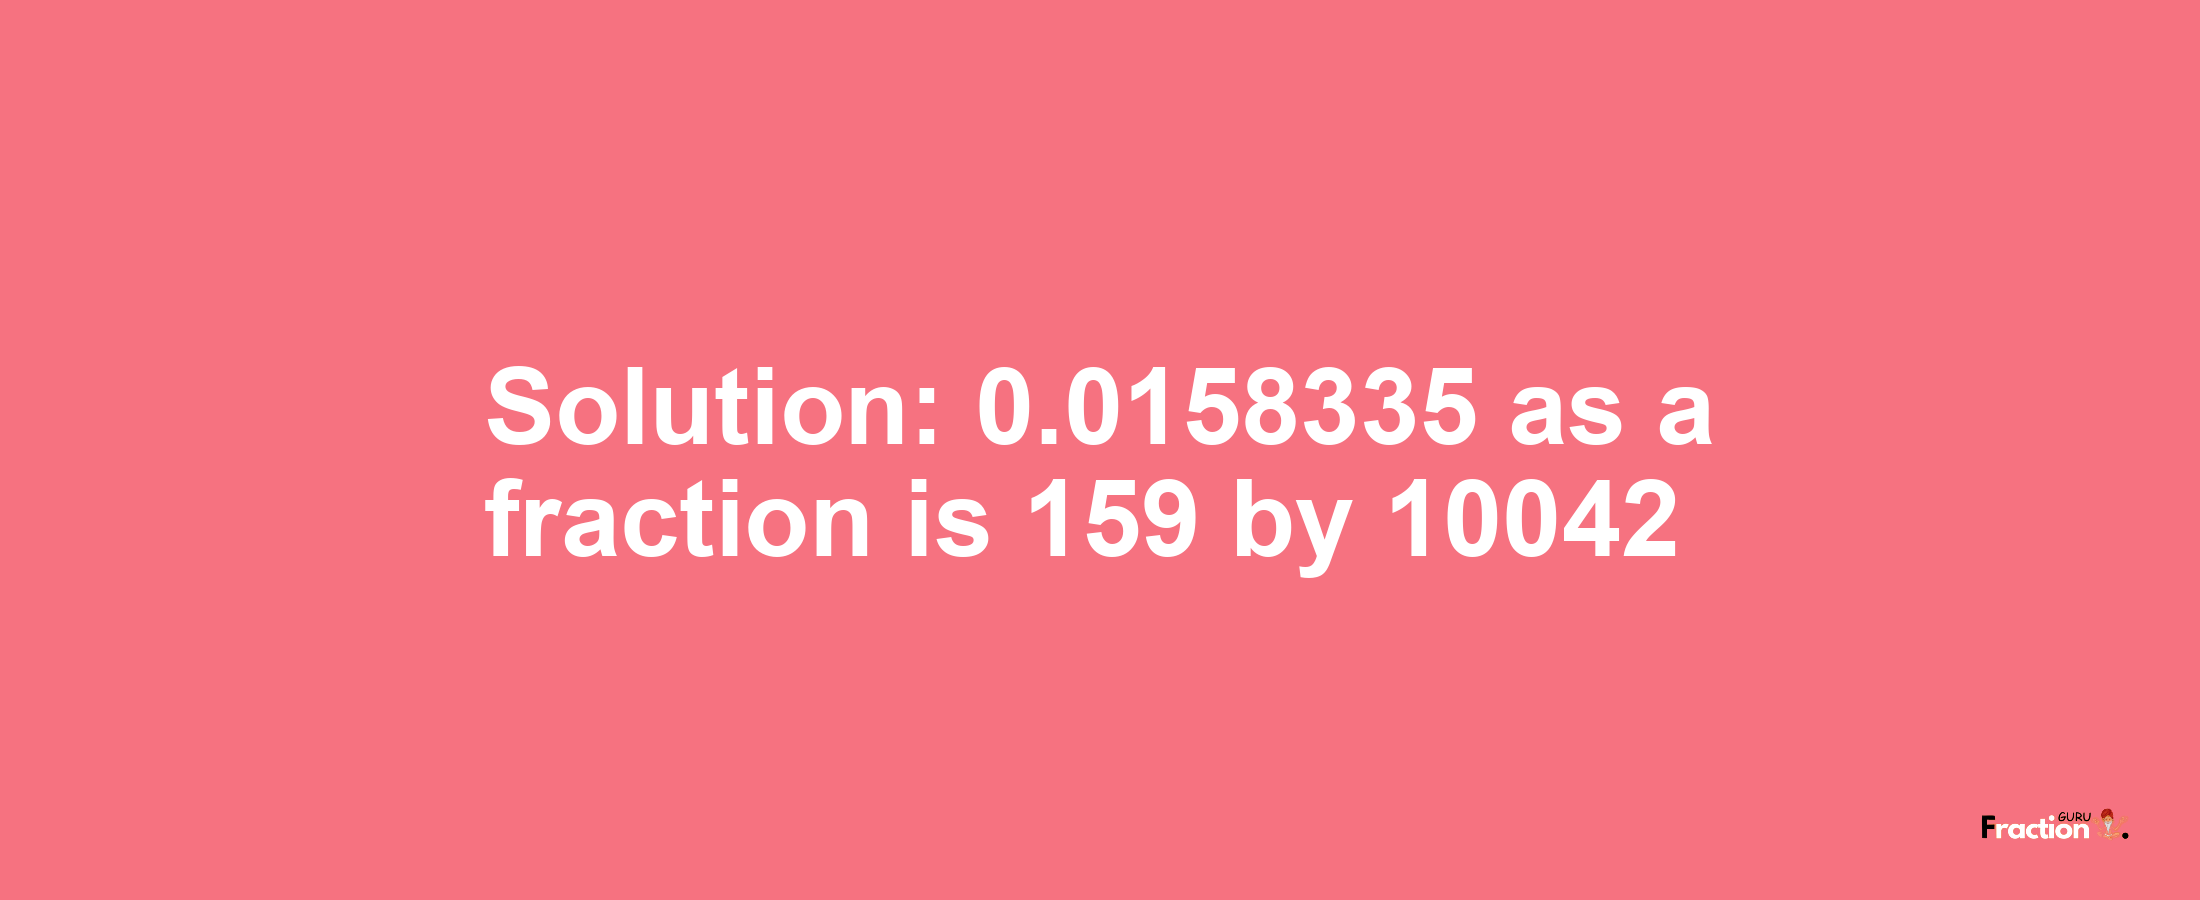 Solution:0.0158335 as a fraction is 159/10042